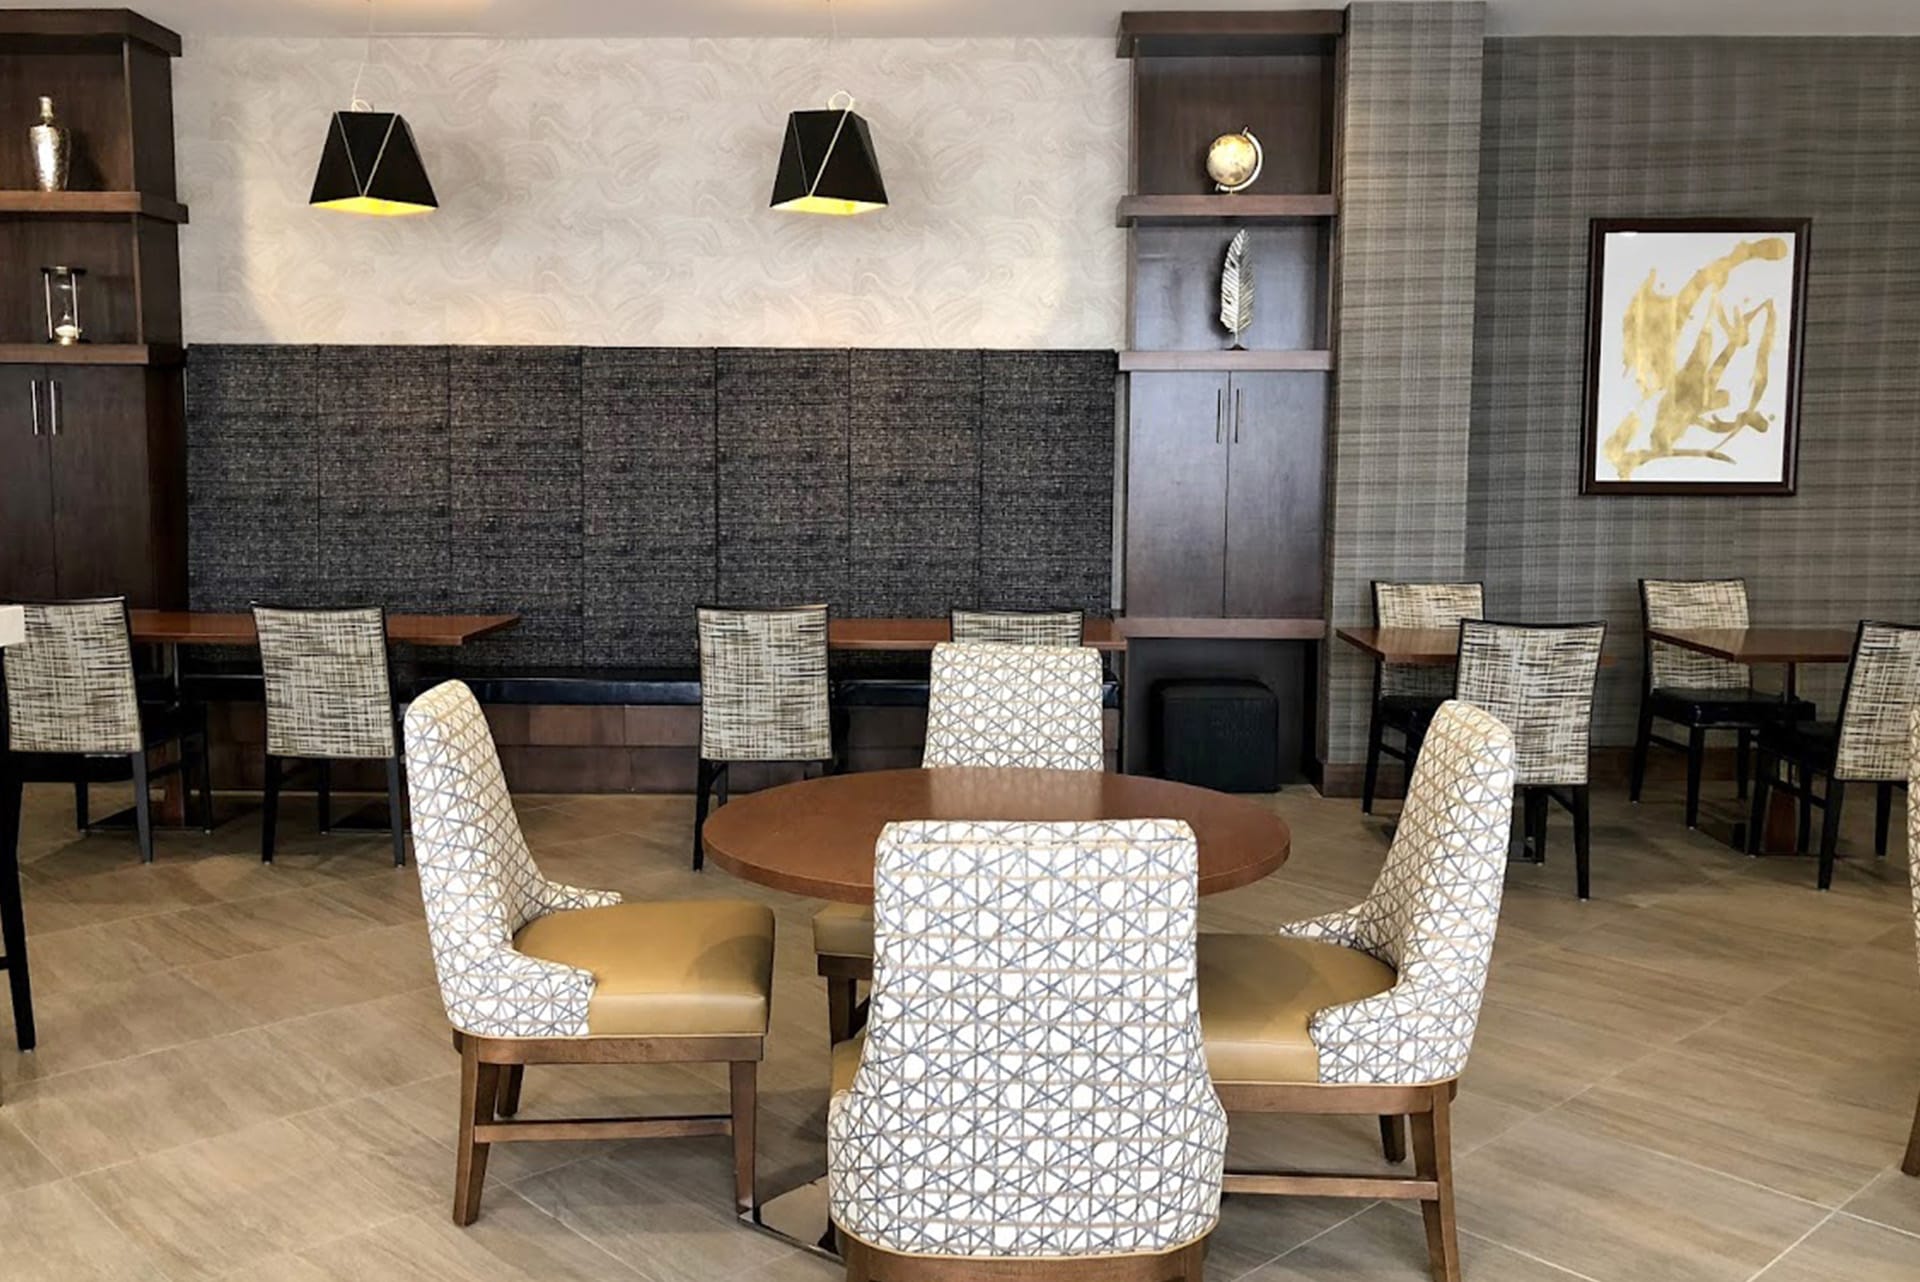 Courtyard and Residence Inn at Northlake by Marriott architecture interior design hospitality